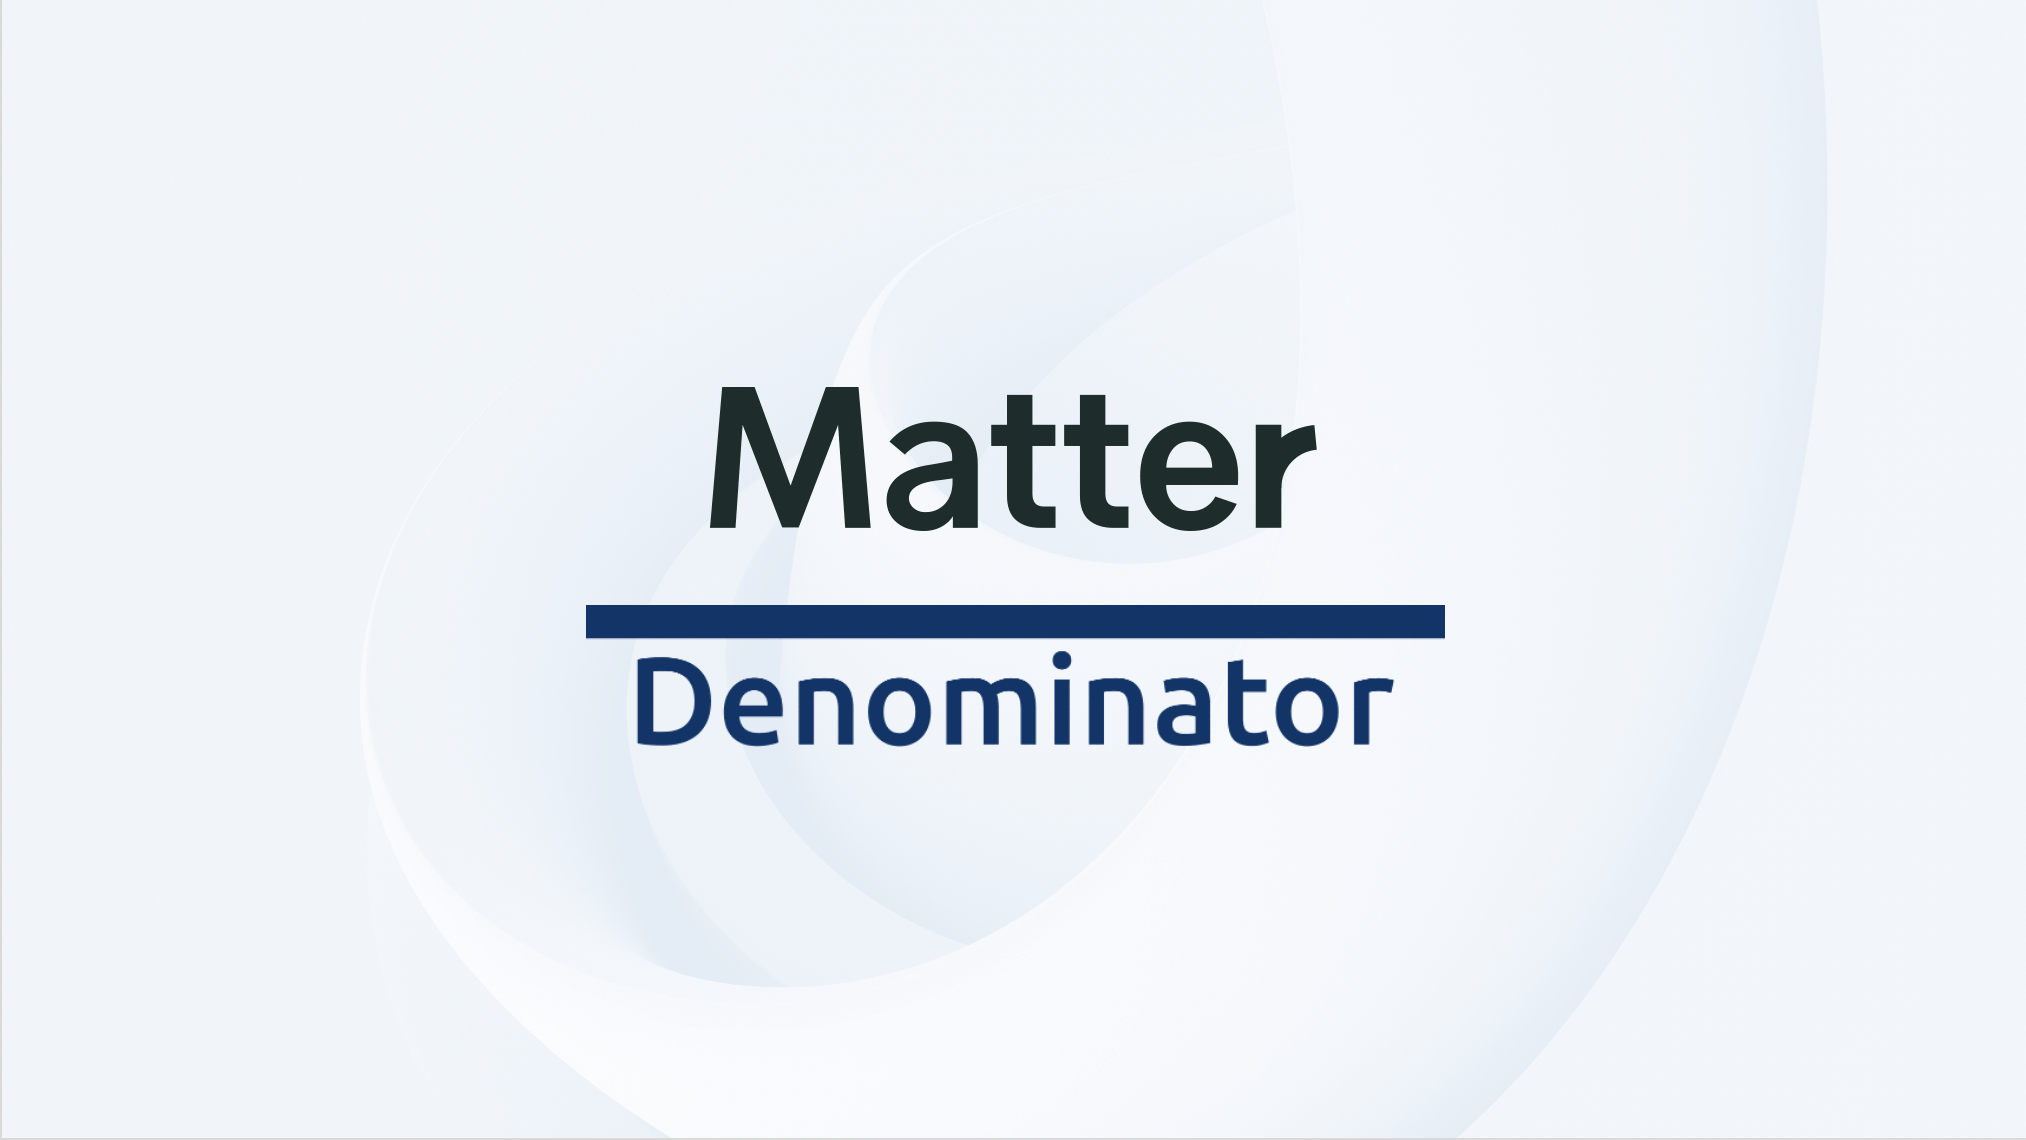 Denominator announce collaboration with Sustainability Insights provider Matter